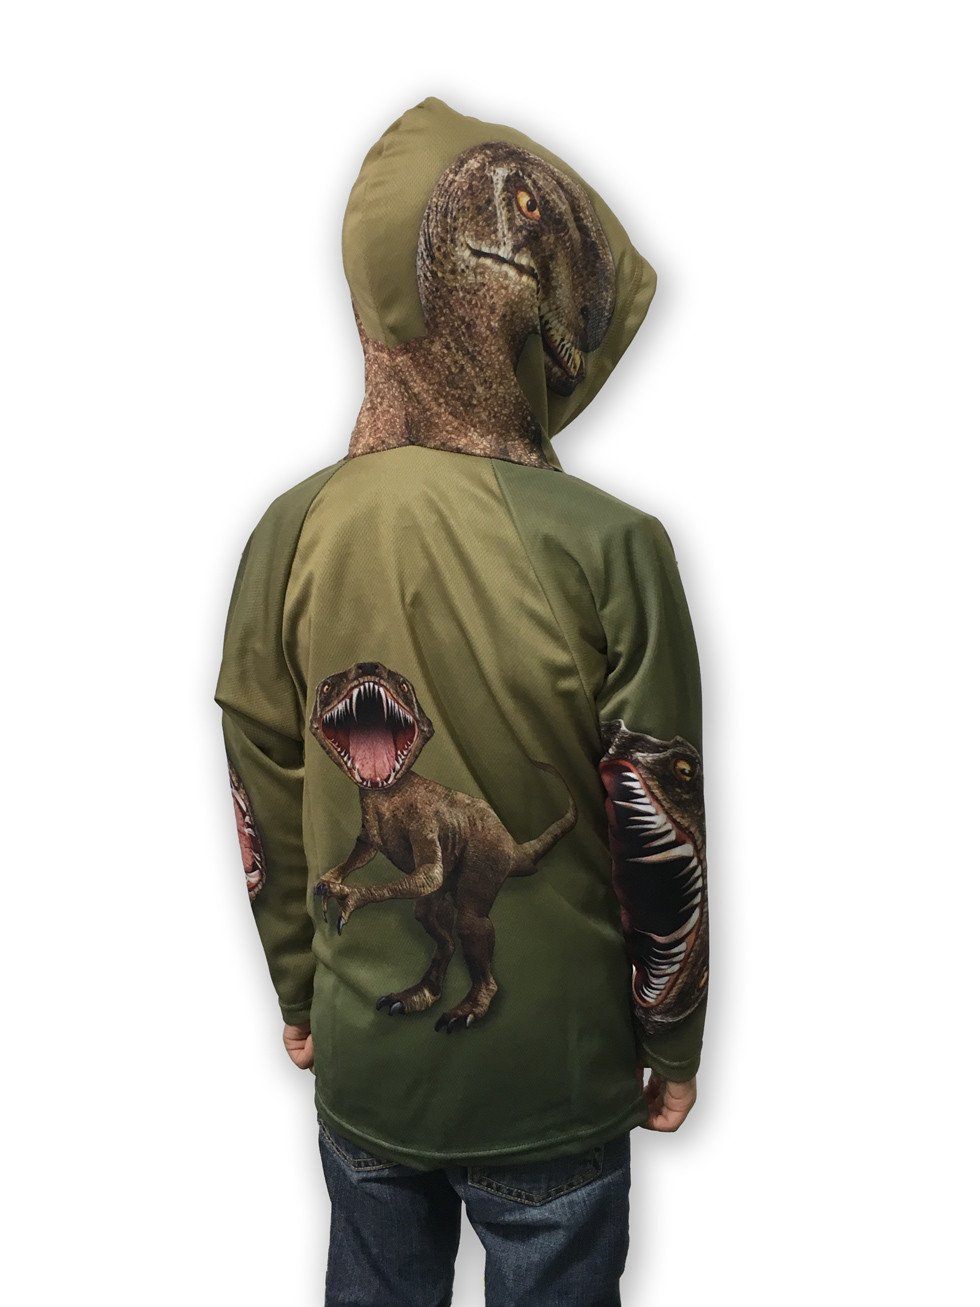 RAPTOR Dino 3D Hoodie Sport Shirt by MOUTHMAN® Kid's Clothing 